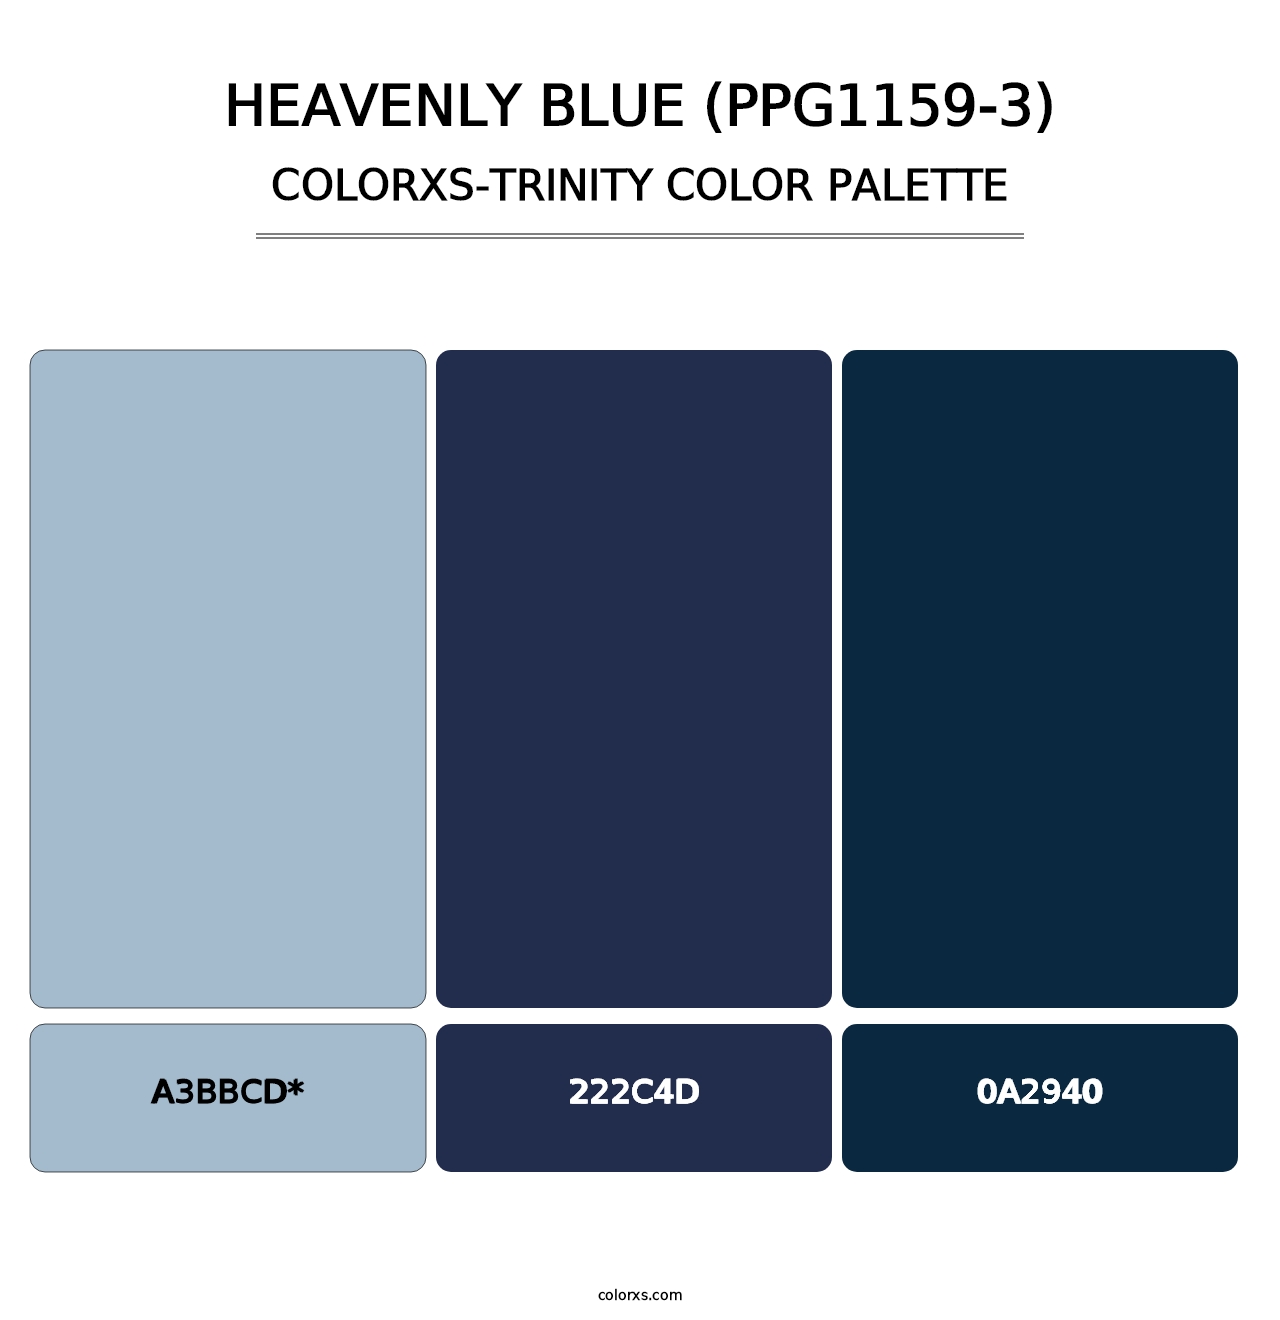 Heavenly Blue (PPG1159-3) - Colorxs Trinity Palette